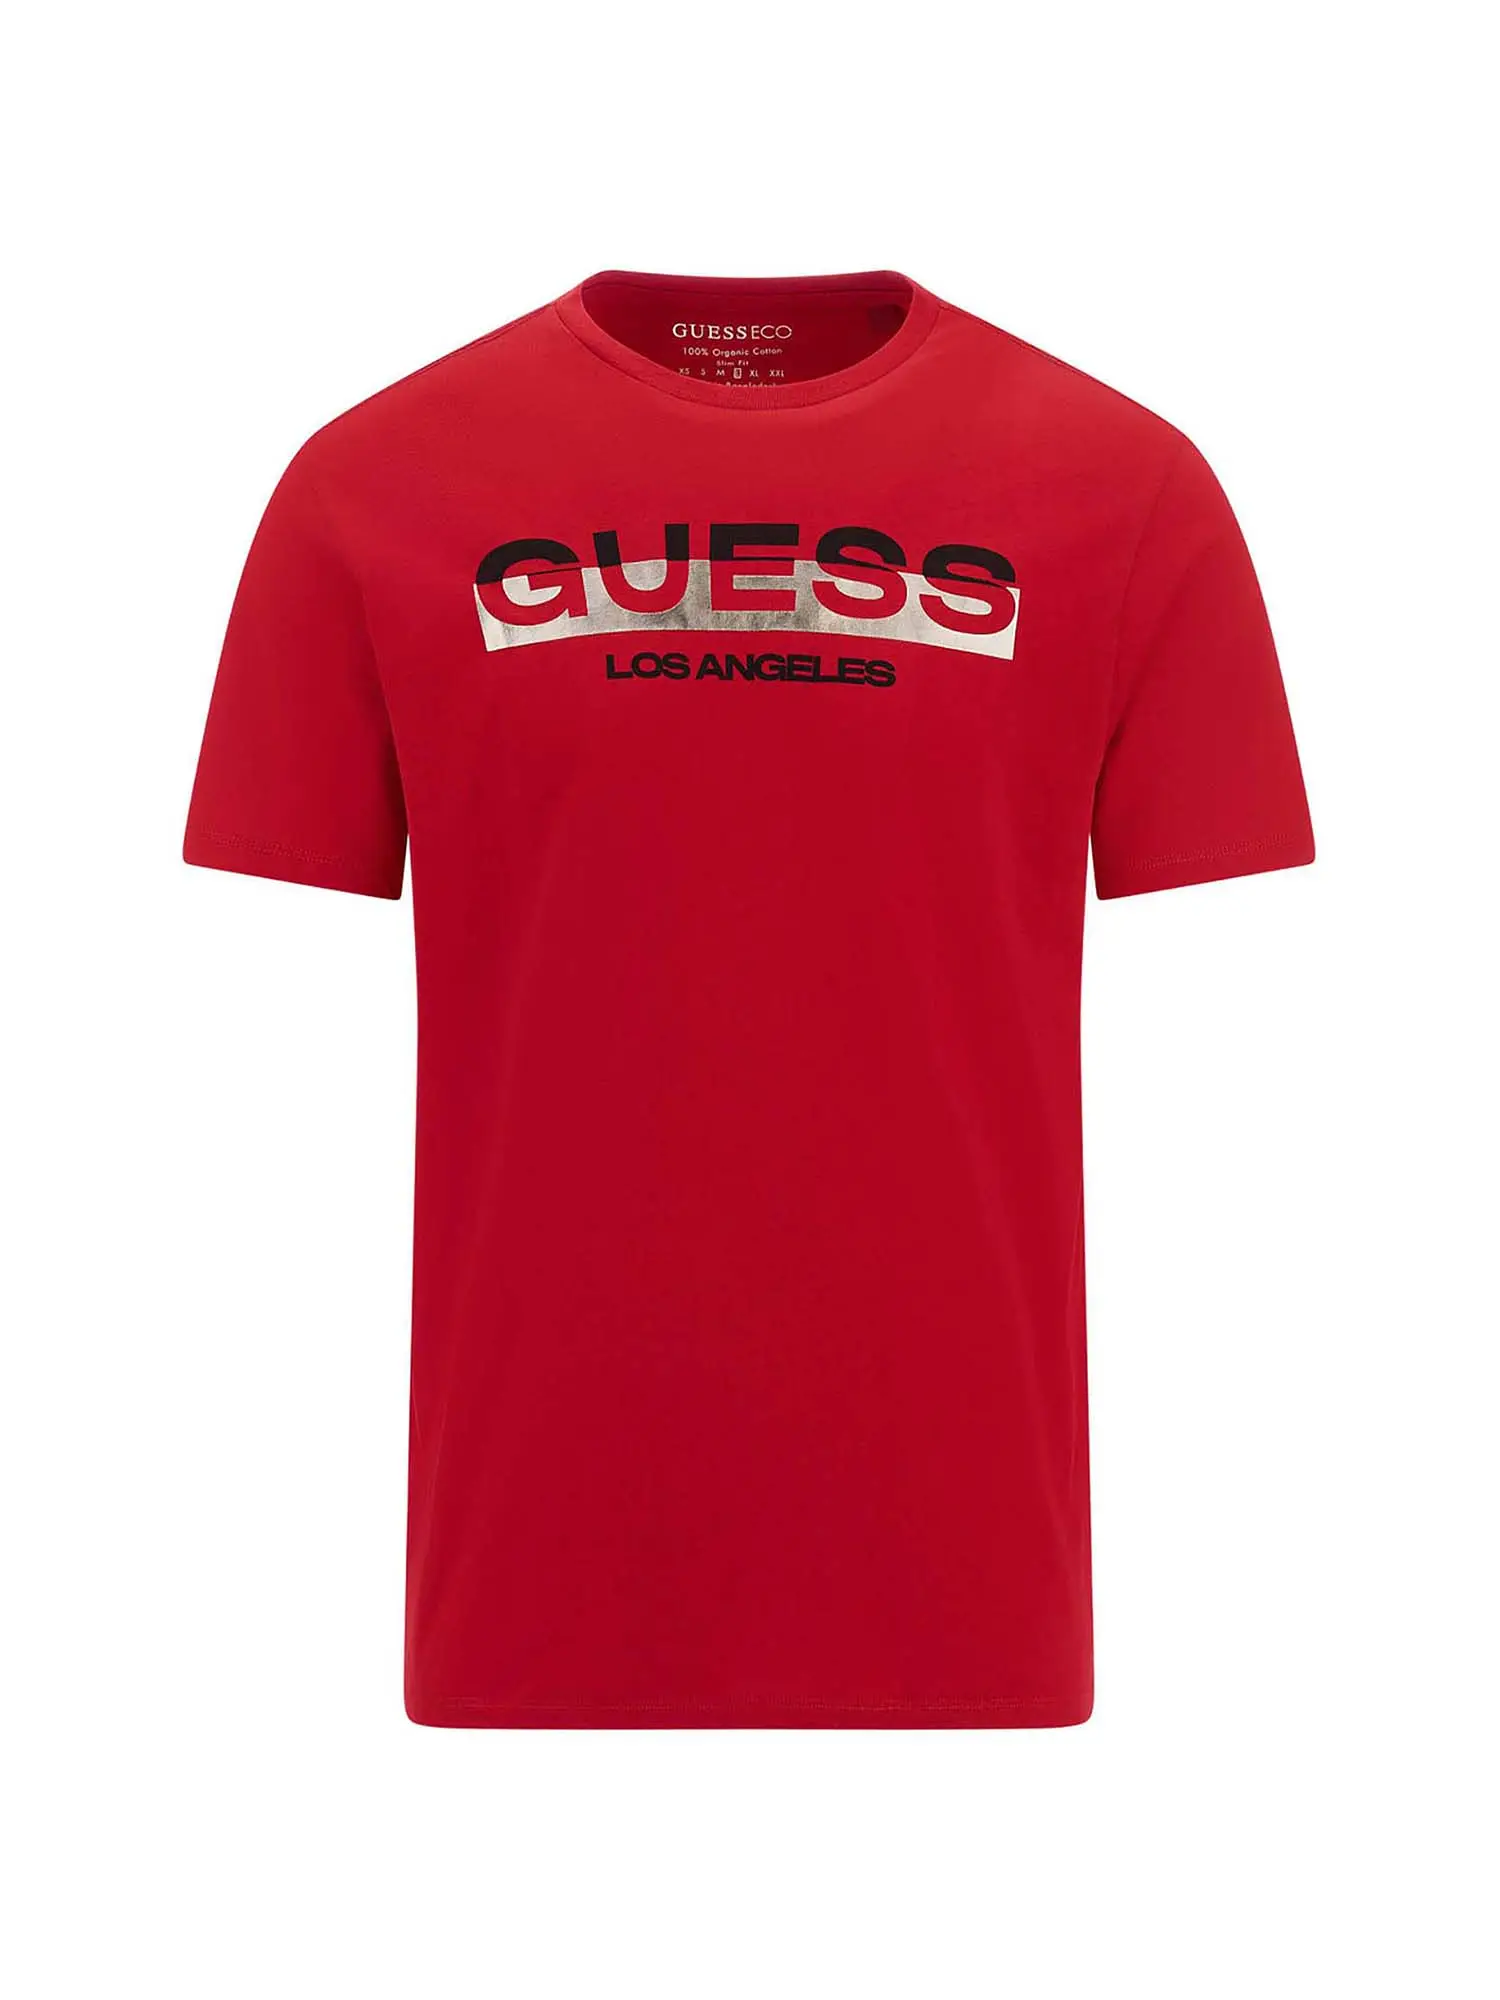 T-SHIRT UOMO - GUESS JEANS - M4RI60 K9RM1 - ROSSO, XL